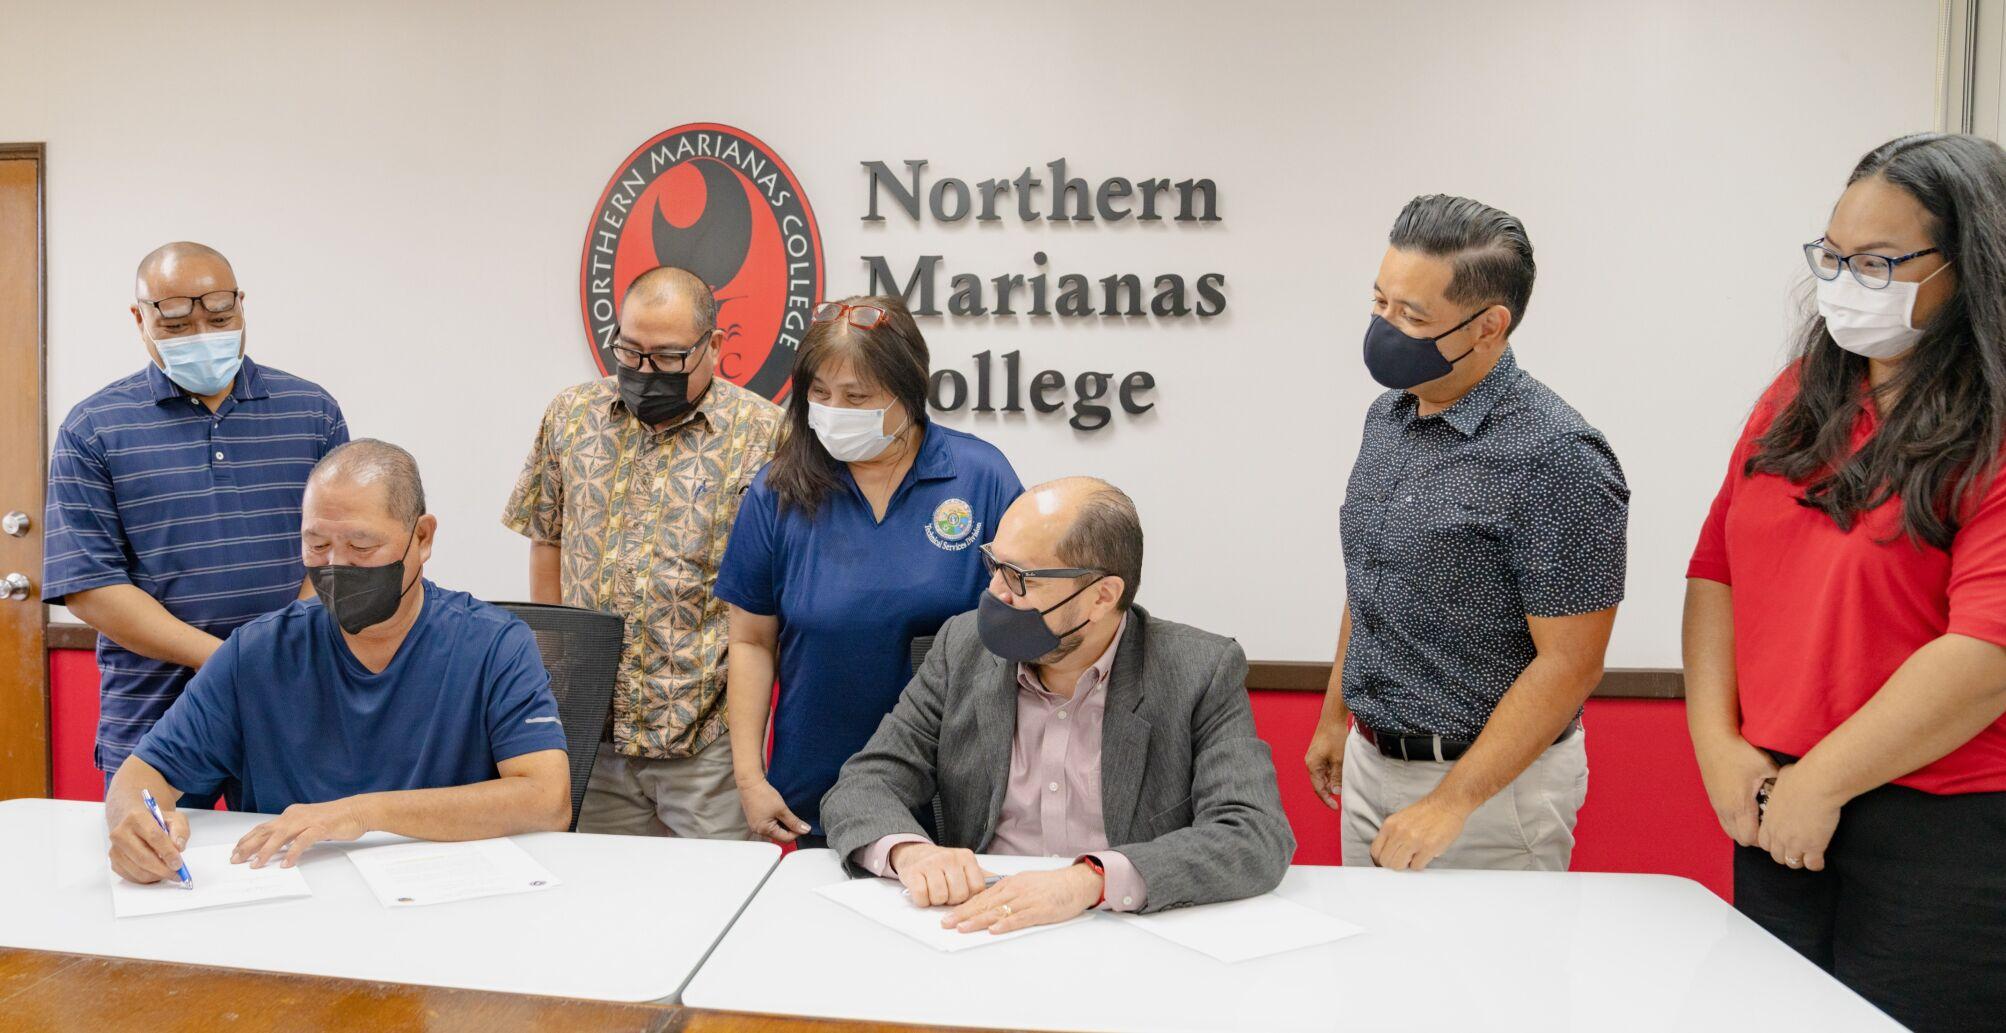 Northern Marianas College has signed an agreement with the Department of Public Works to establish a federally funded on-the-job training and social support program.  In the picture are Department of Public Works Secretary James Ada, second left, signing the MOA as NMC President Galvin S. Deleon Guerrero, Vice President for Administration and Advancement Frankie Eliptico, second right, DPW and NMC staff look on Tuesday in the NMC administration conference room.